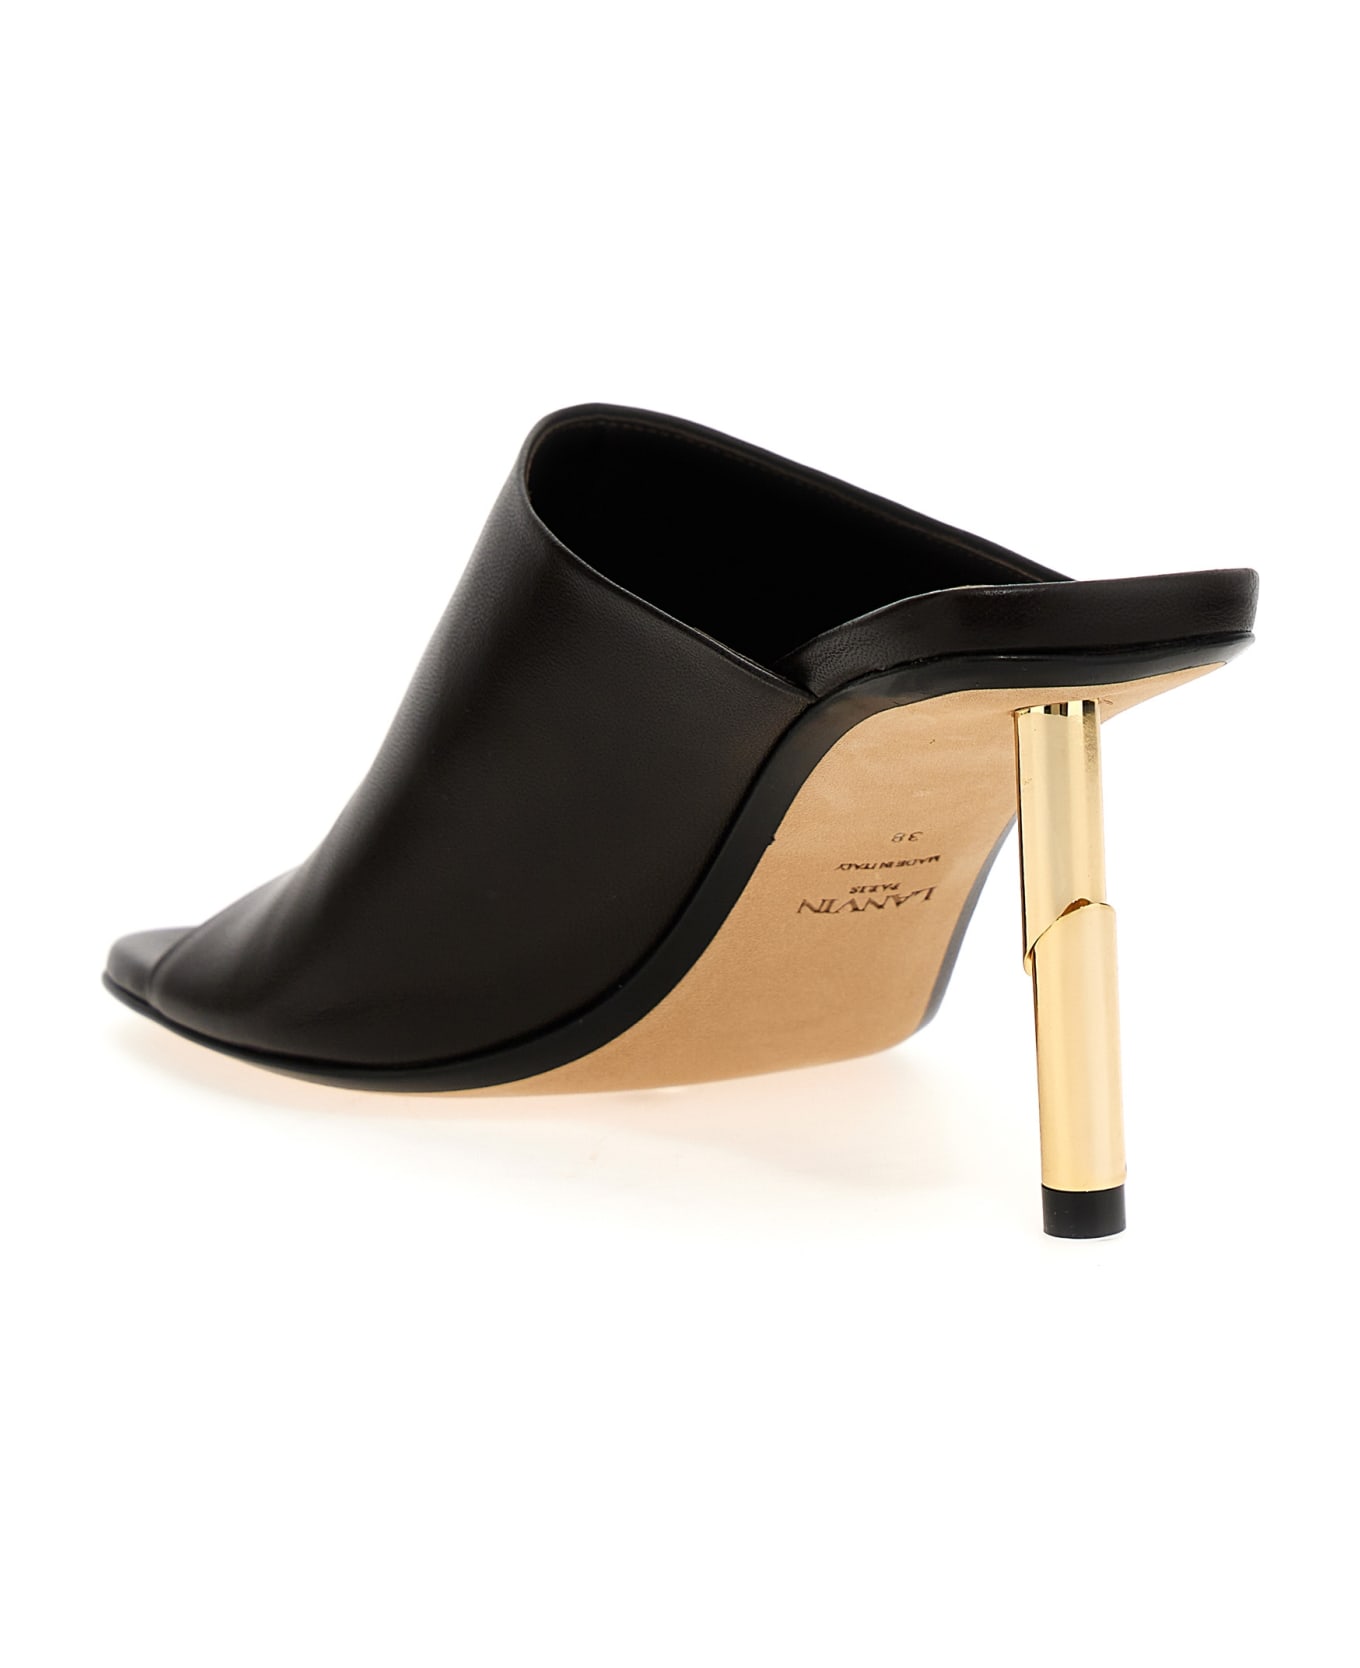 Lanvin 'sequence' Mules - Brown